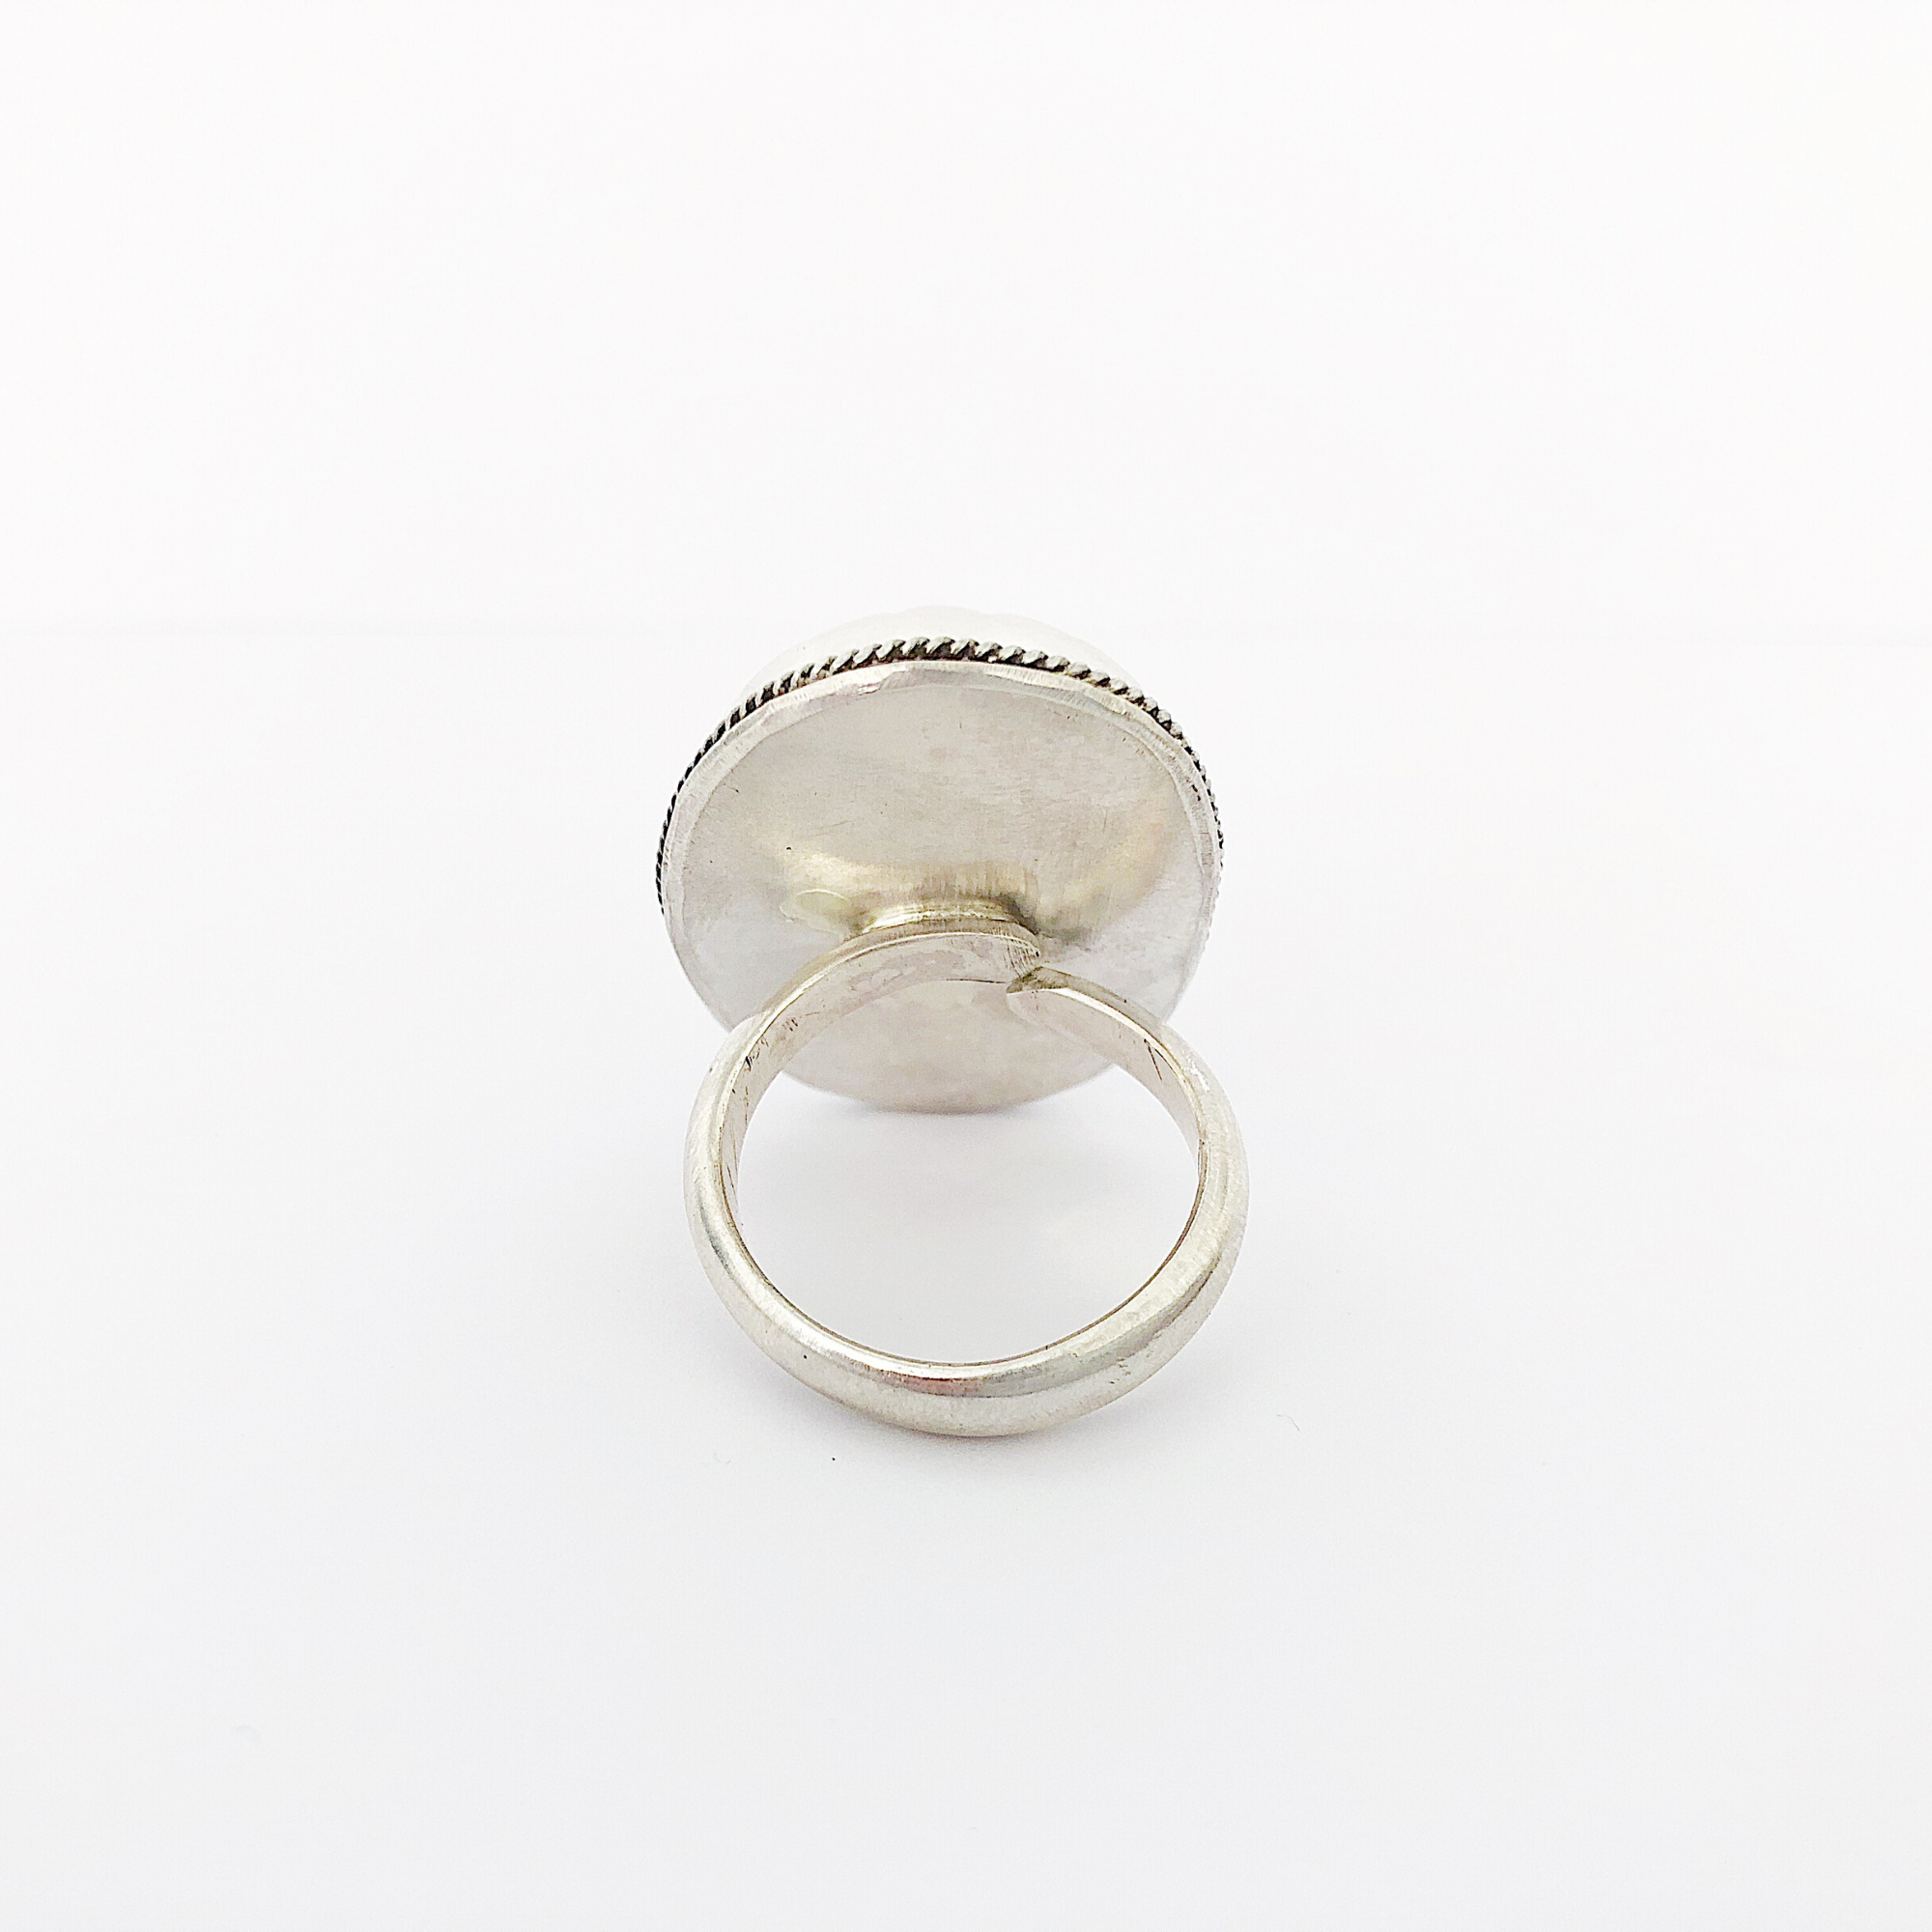 ~MADE TO ORDER | ezy ryder ring~